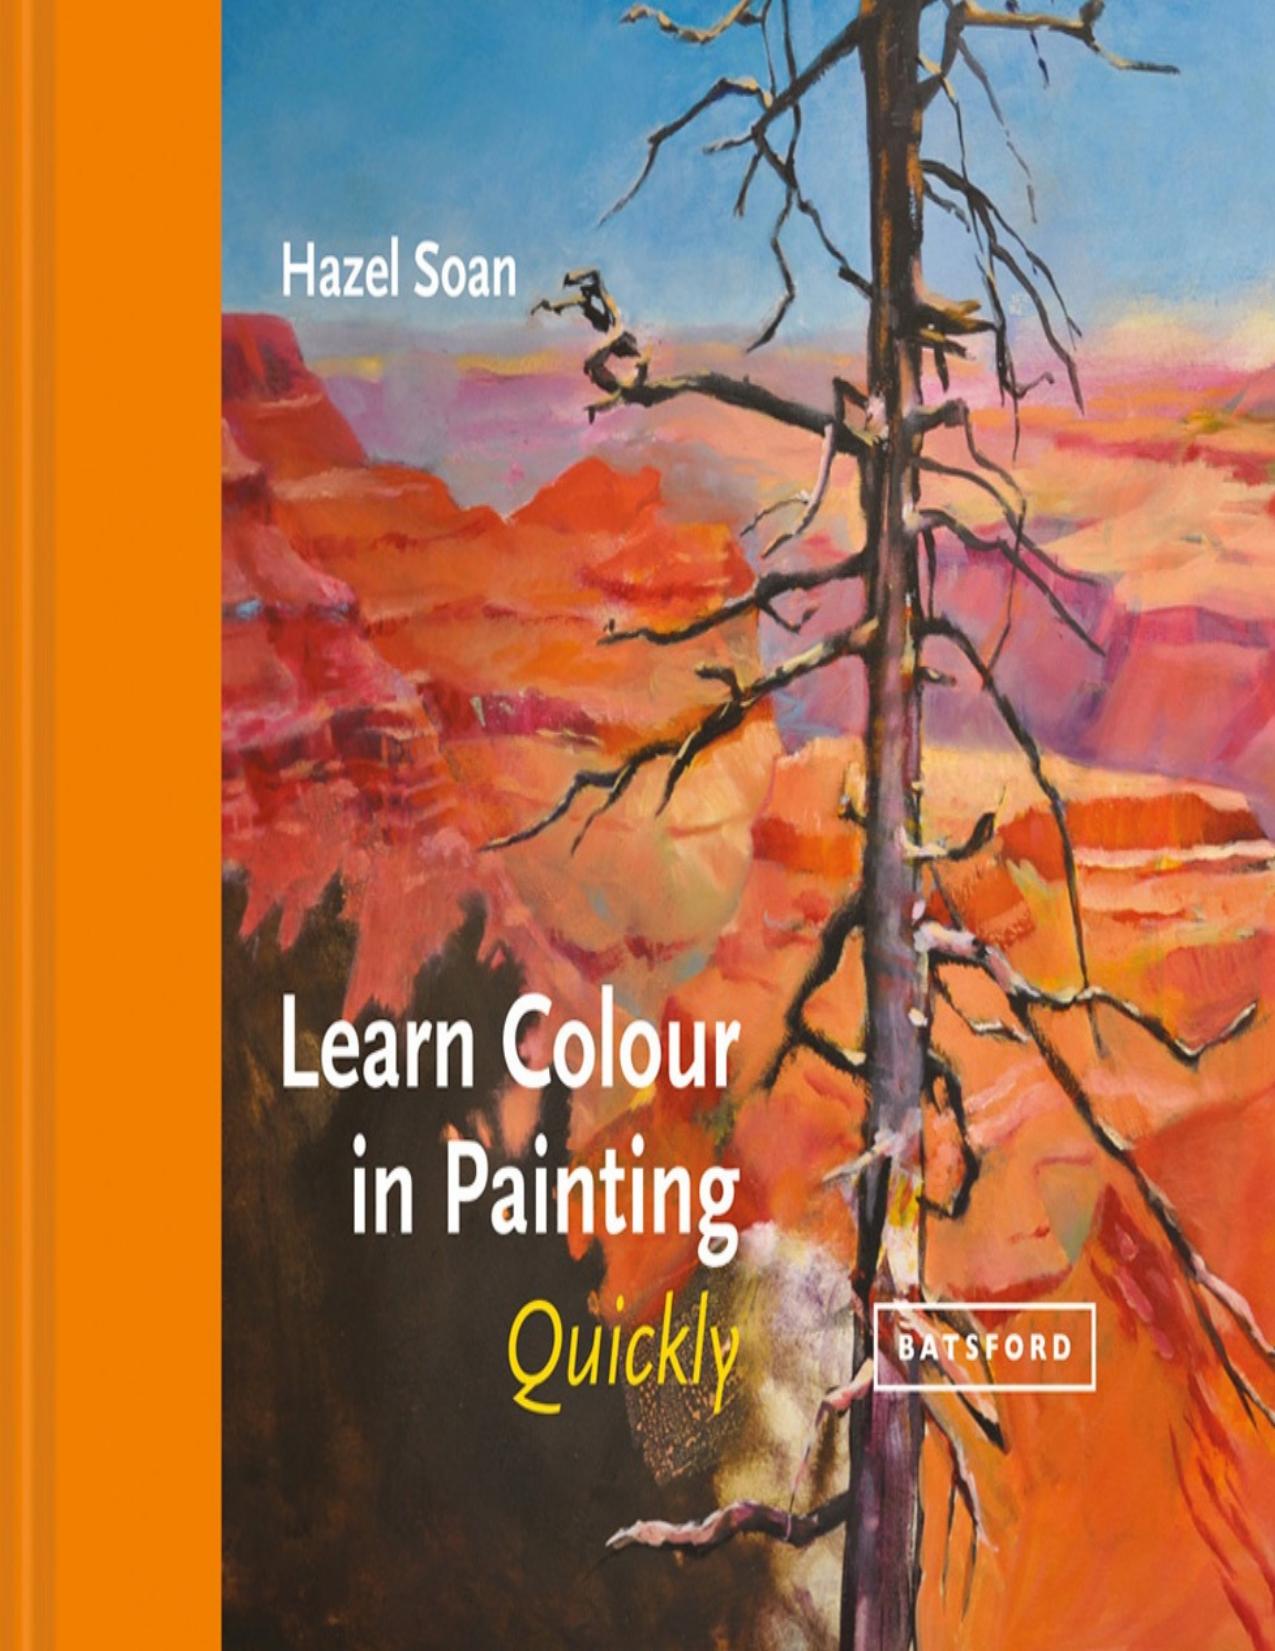 Learn Colour In Painting Quickly by Hazel Soan